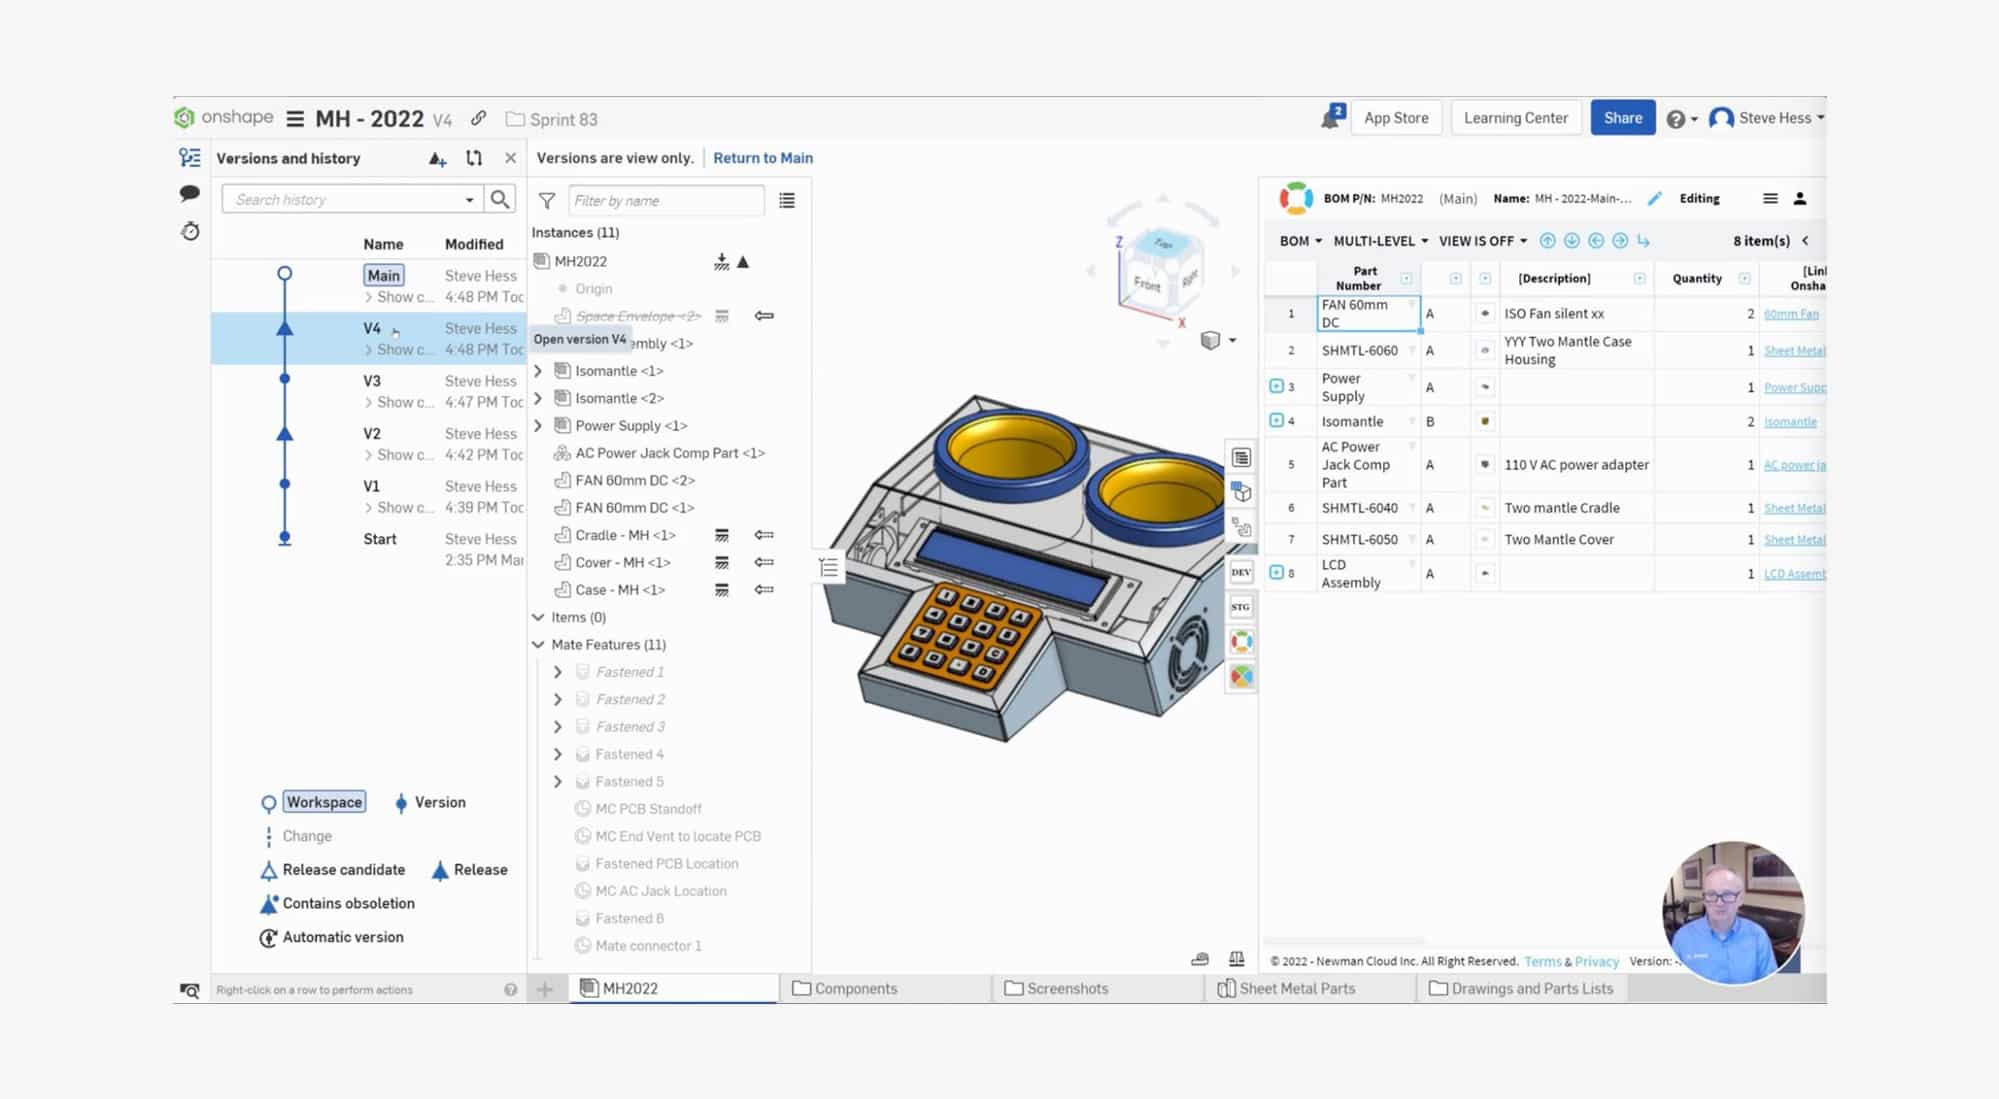 OpenBOM Support For Onshape Versions and Digital Thread